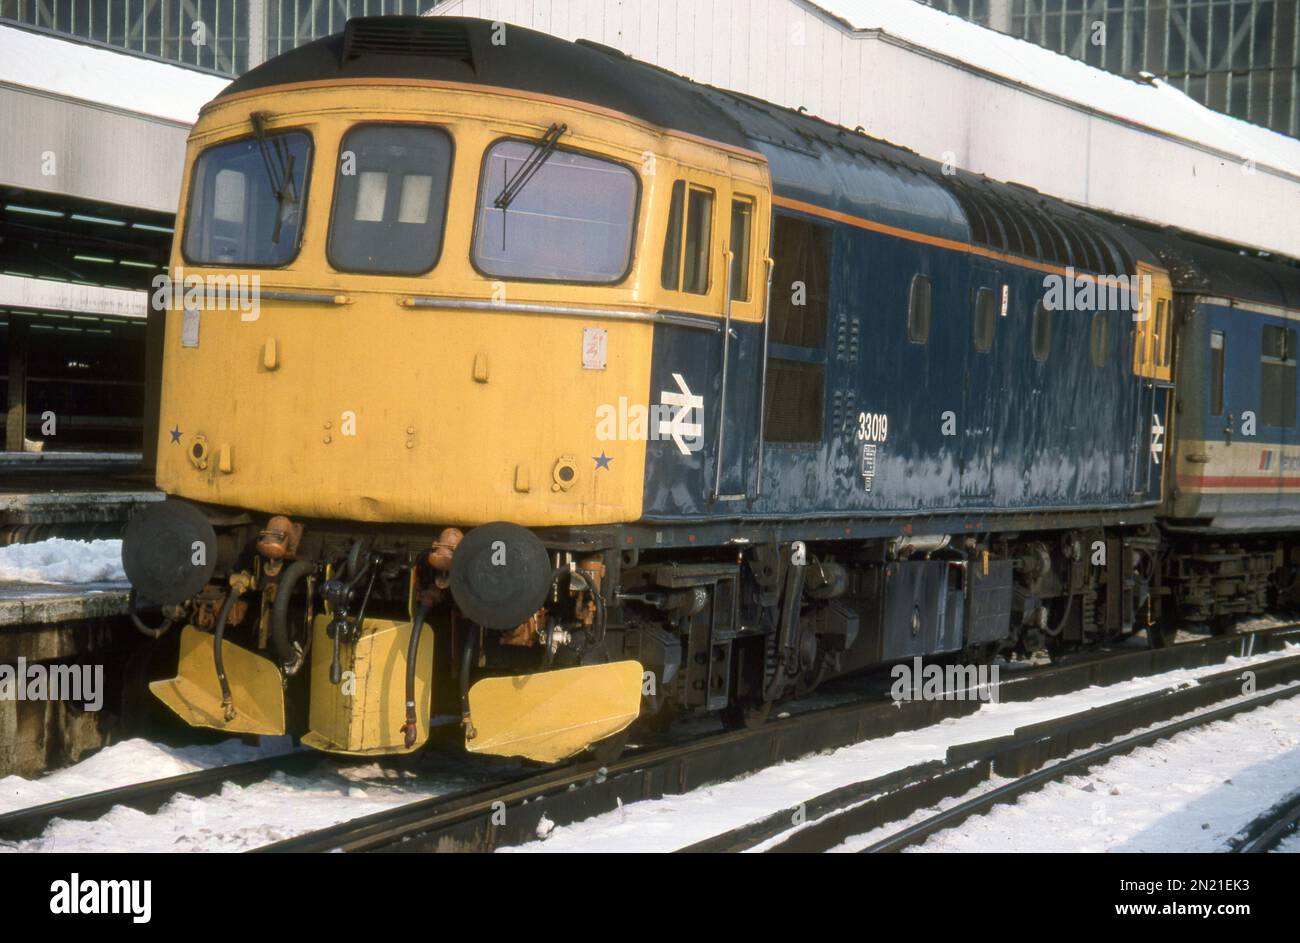 Ready to plough through the snow! True blue and immaculate Class 33 'Crompton' 33019 seen at London Waterloo on 1V11 the 11.10 Waterloo-Exeter service - taken 11th Feb 1991. Stock Photo